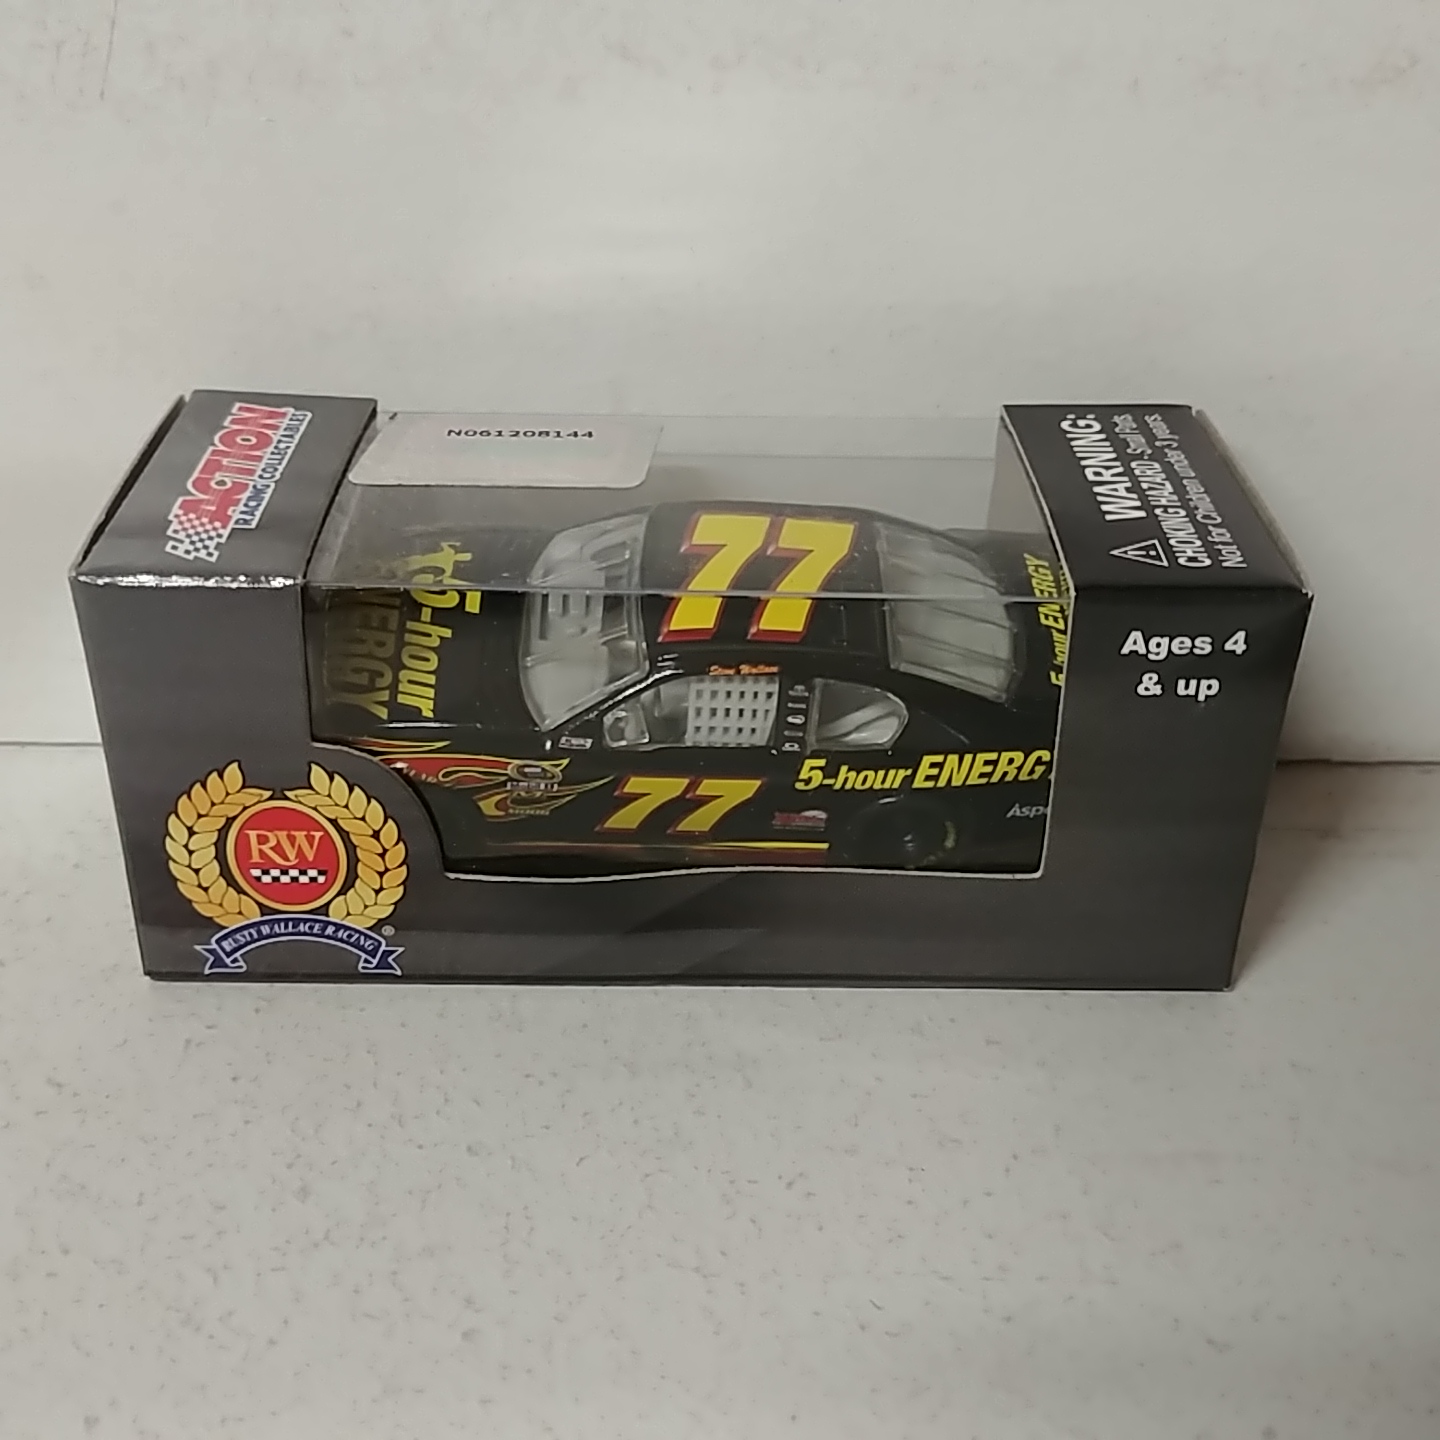 2011 Steve Wallace 1/64th 5-Hour Energy Pitstop Series car